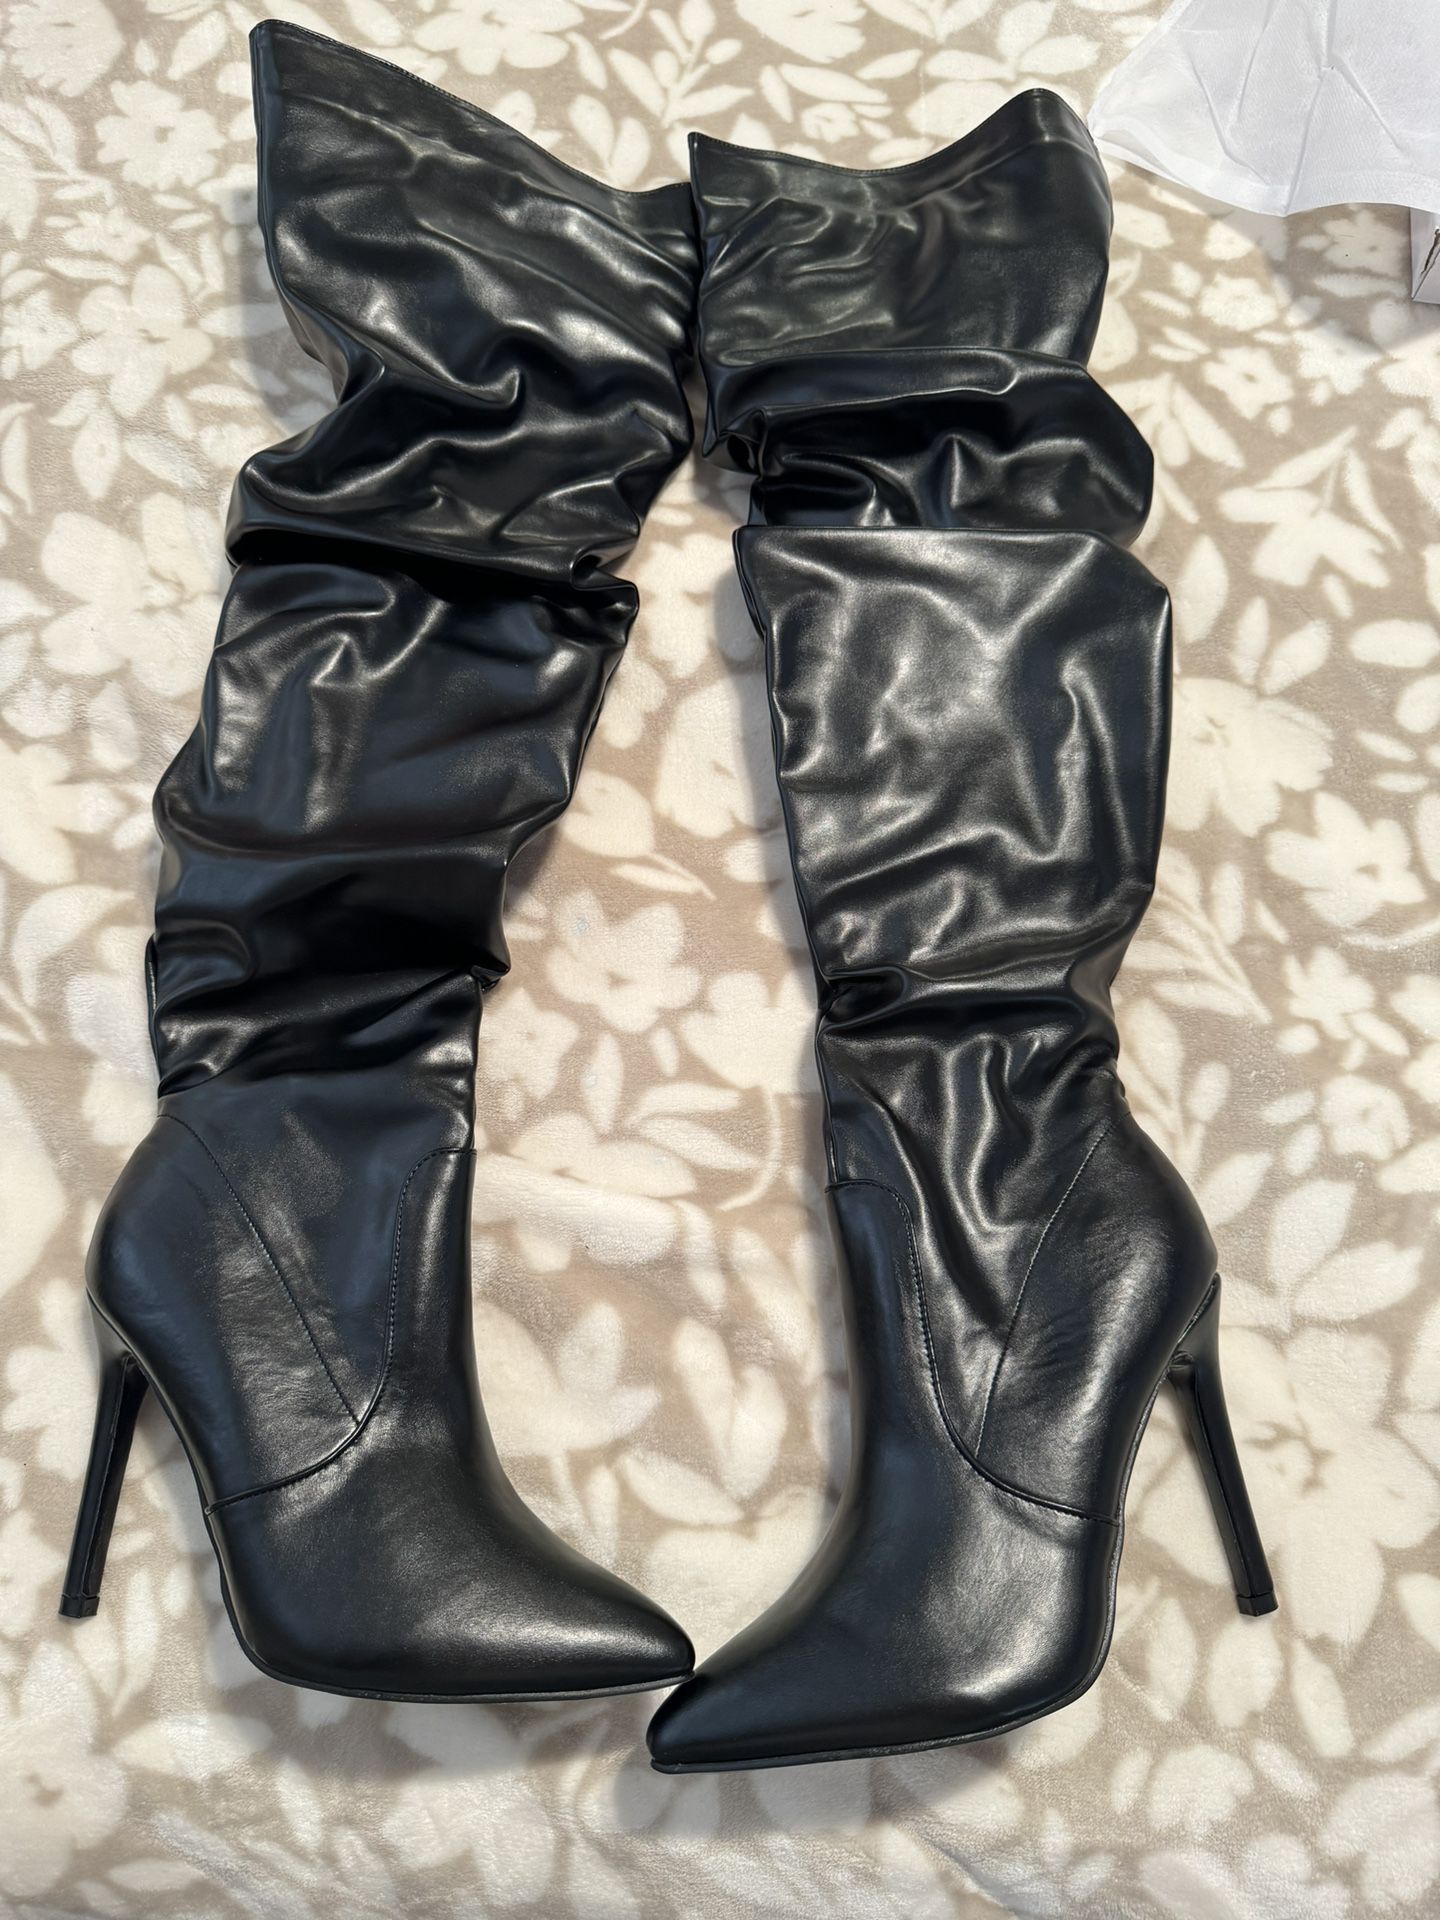 Leather High Knee Boots 